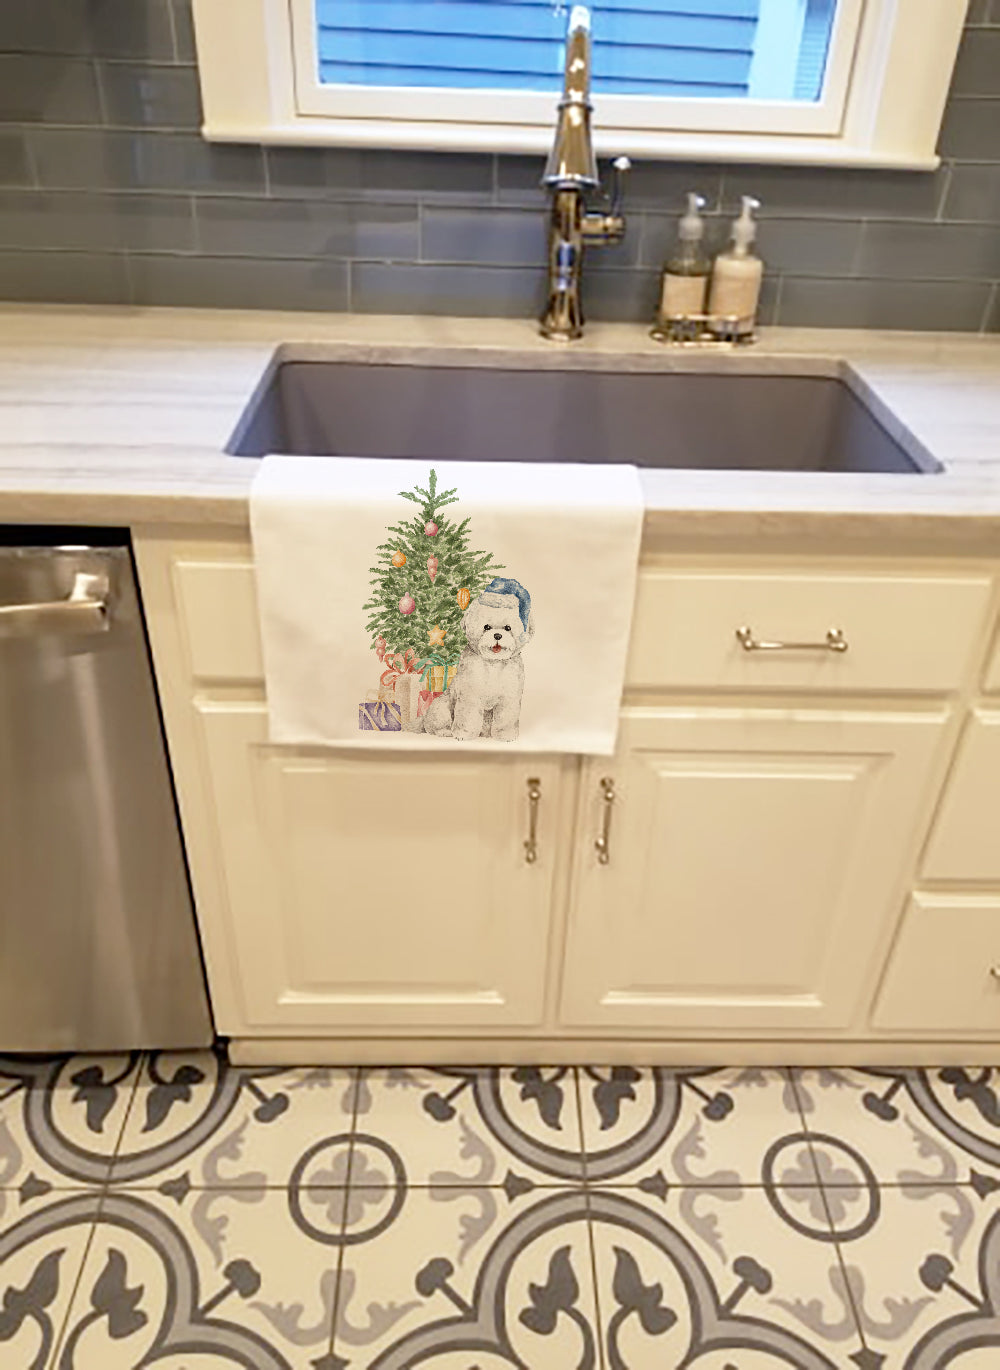 Buy this Bichon Frise Blue Hat Christmas Presents and Tree White Kitchen Towel Set of 2